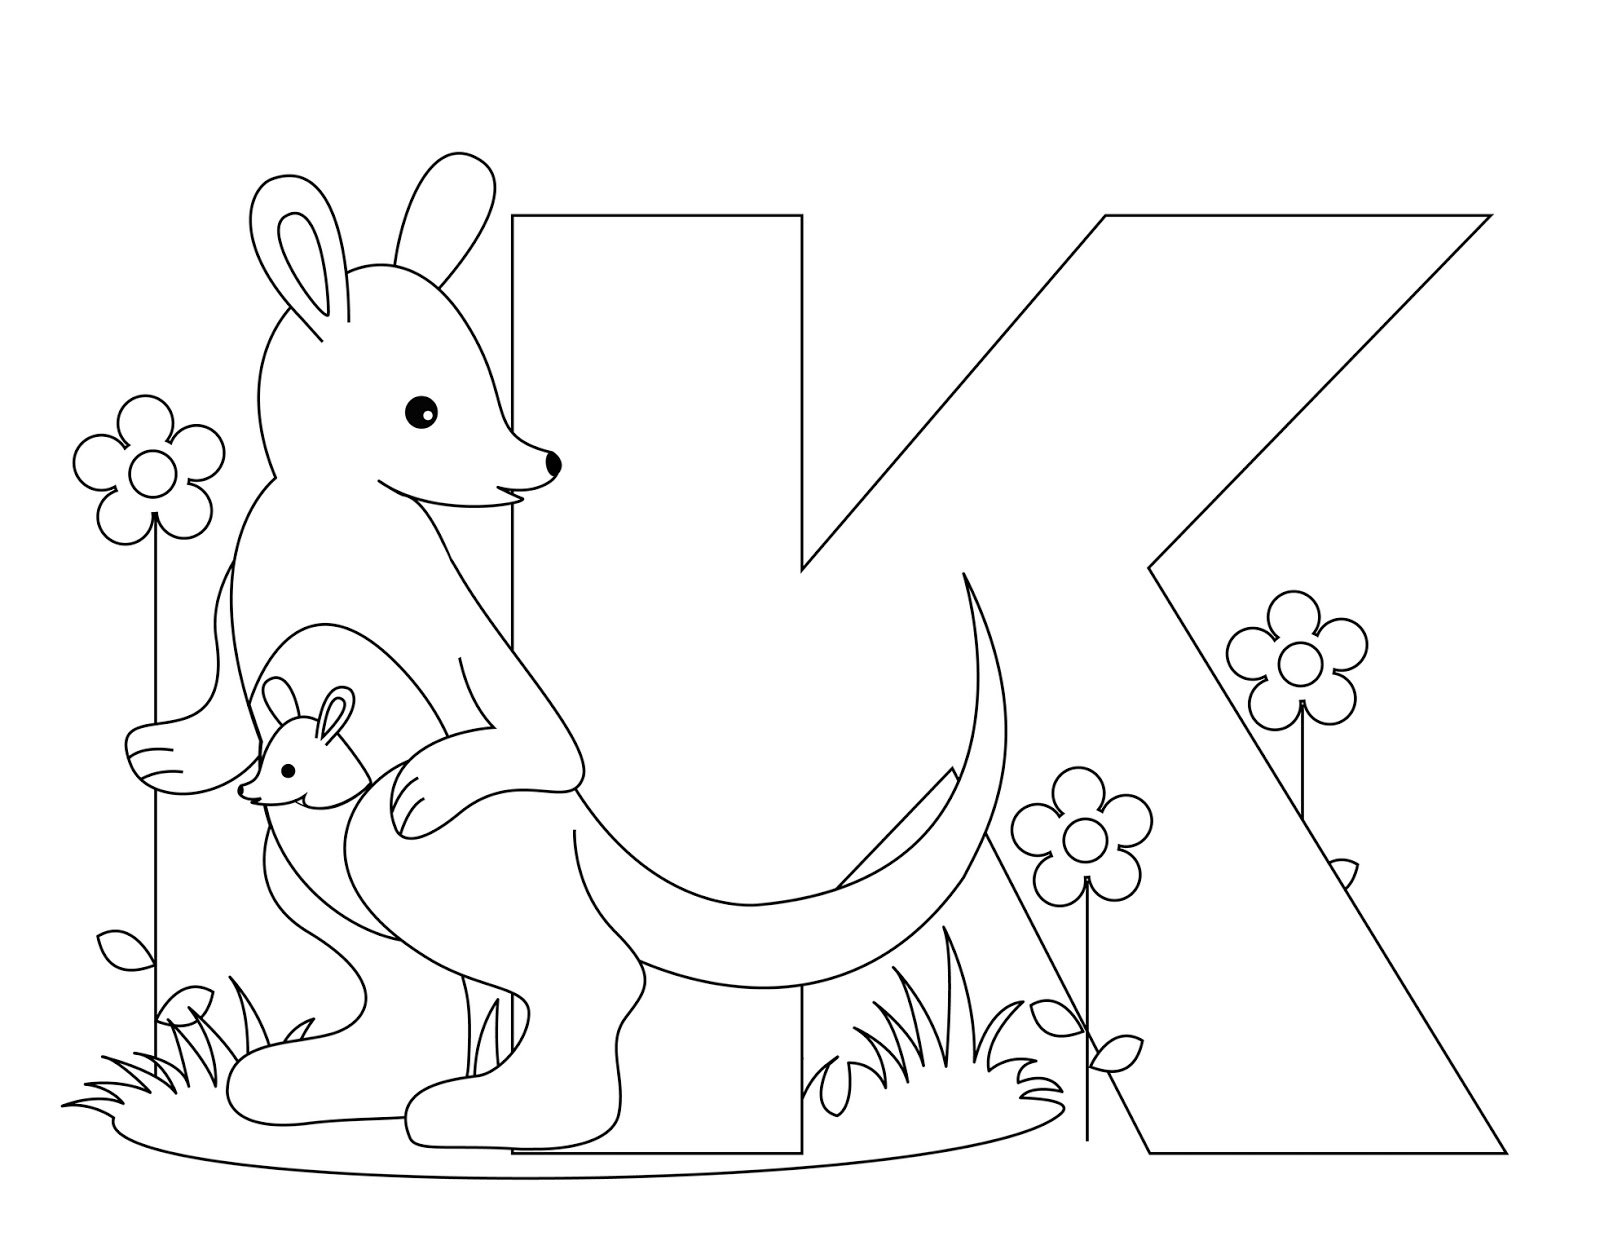 Coloring page: Alphabet (Educational) #124651 - Free Printable Coloring Pages